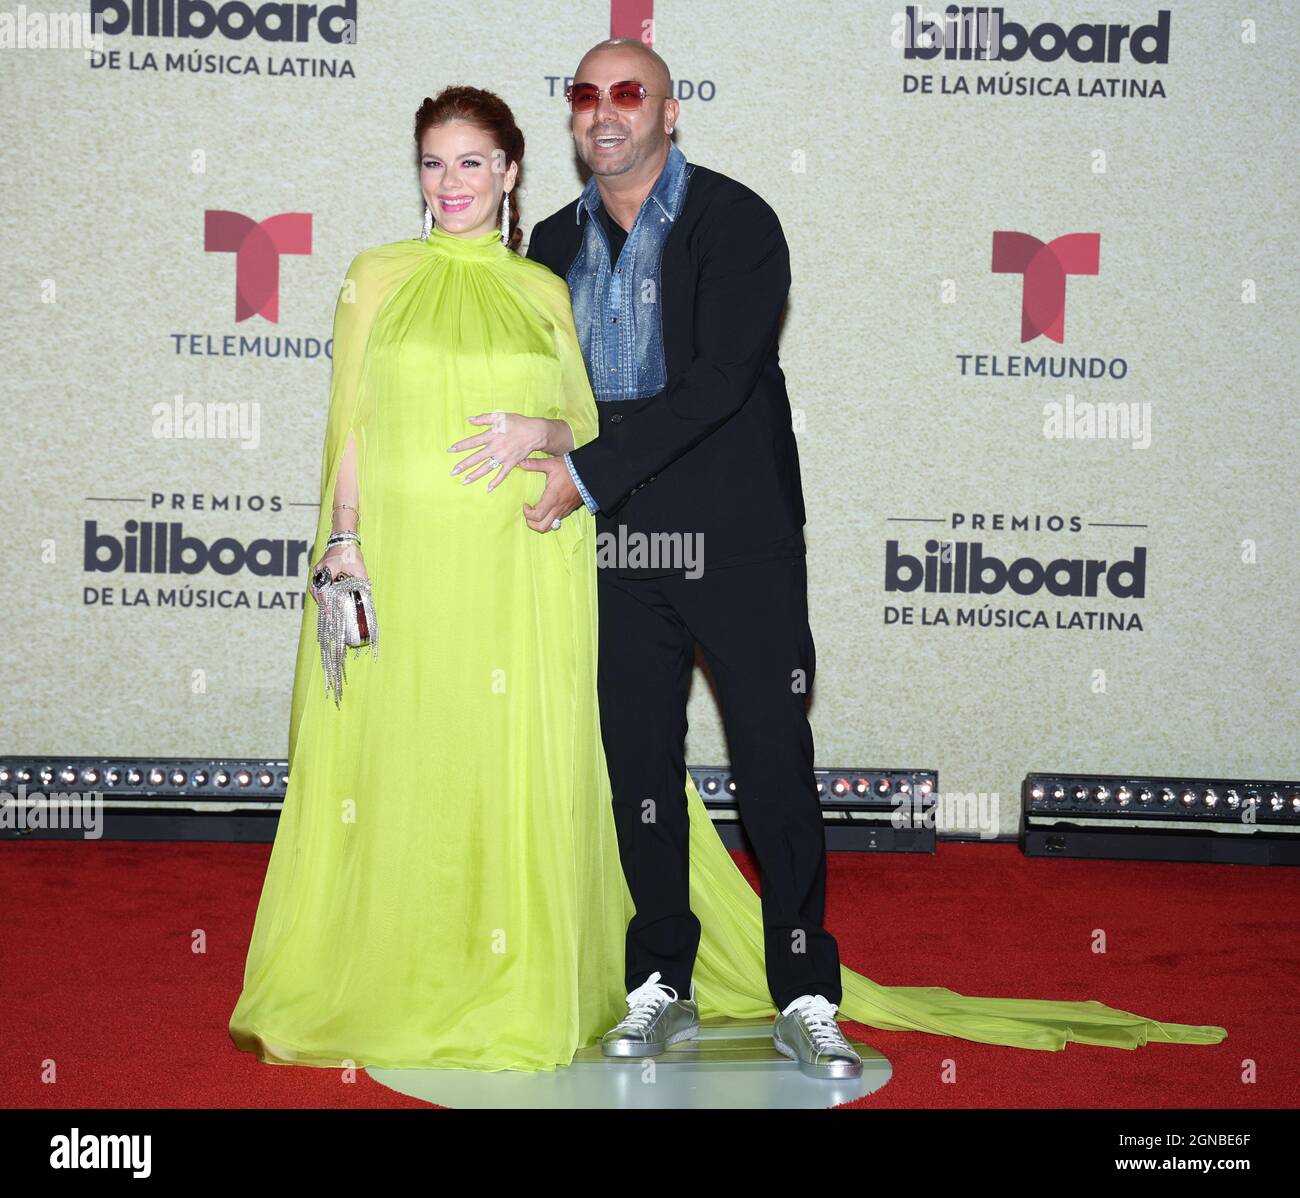 Coral Gables, United States. 24th Sep, 2021. Yomaira Ortiz Feliciano and Wisin (R) arrive on the red carpet at the 2021 Latin Billboard Music Awards at the University of Miami, Watsco Center, Thursday, September 23, 2021 in Coral Gables, Florida. Photo by Gary I Rothstein/UPI Credit: UPI/Alamy Live News Stock Photo